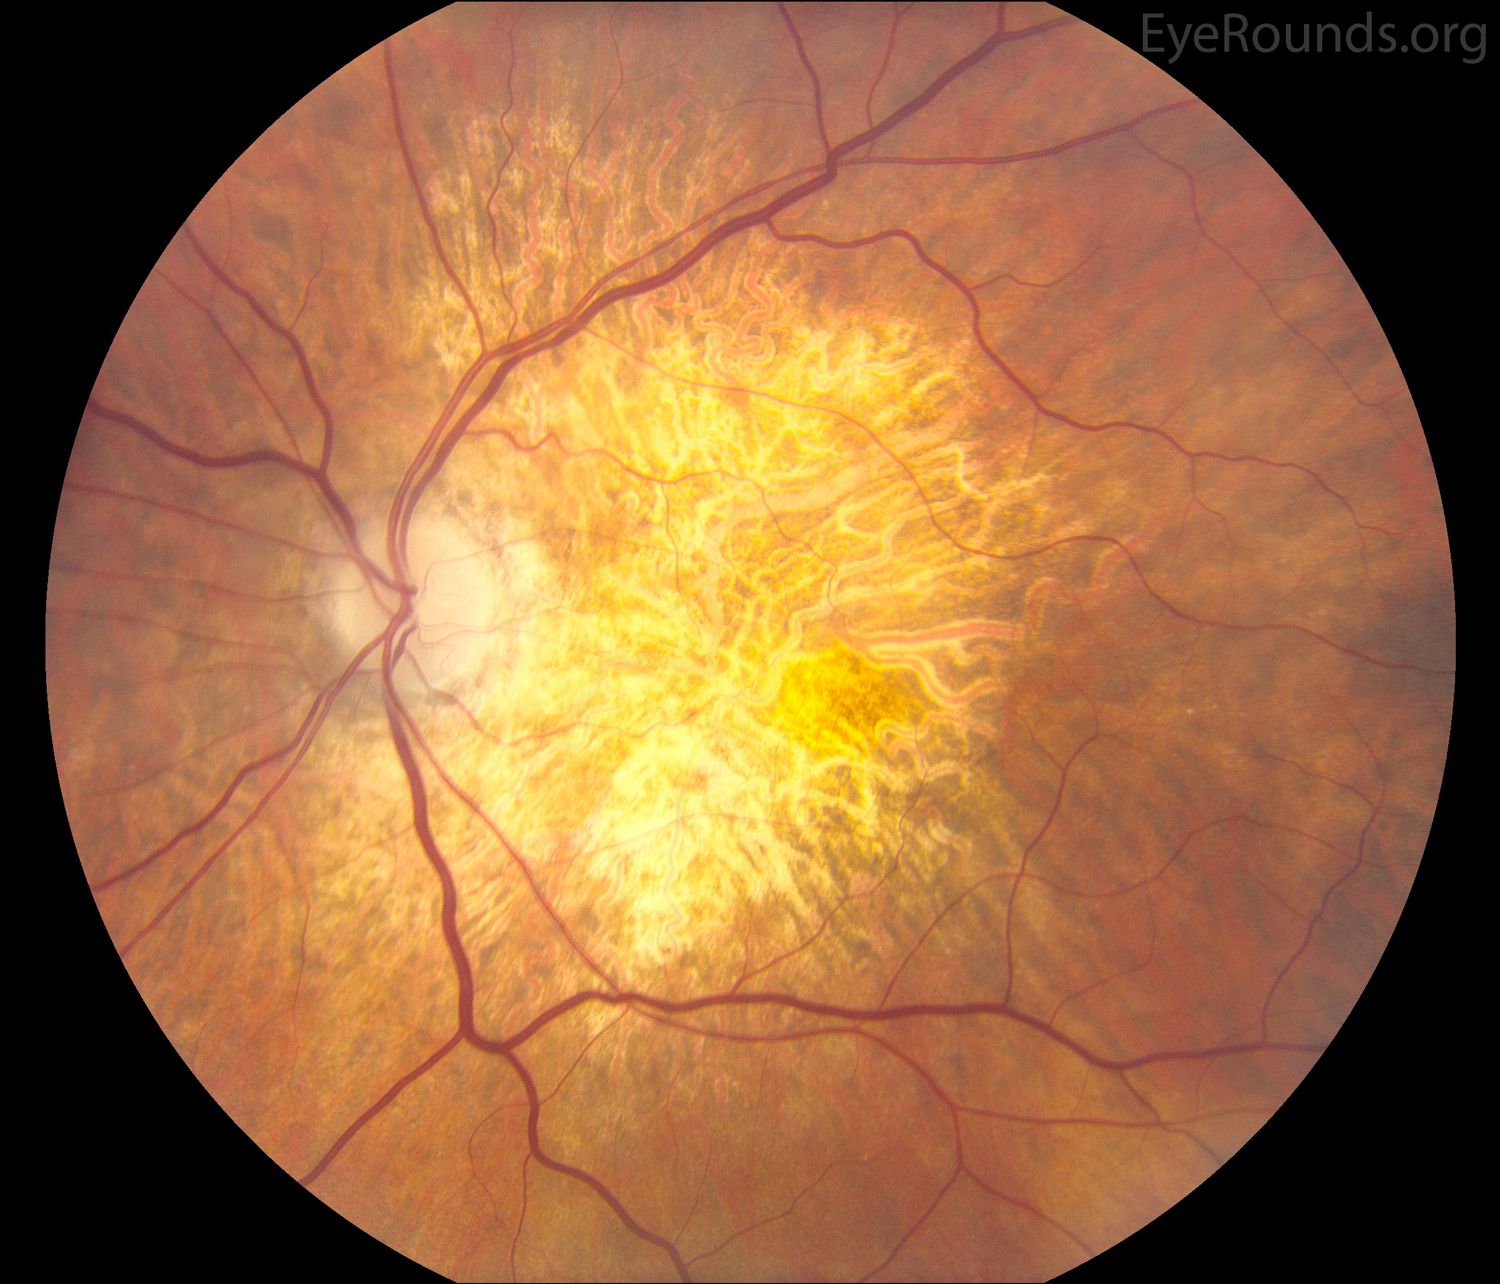 Non-exudative macular degeneration with extensive geographic atrophy